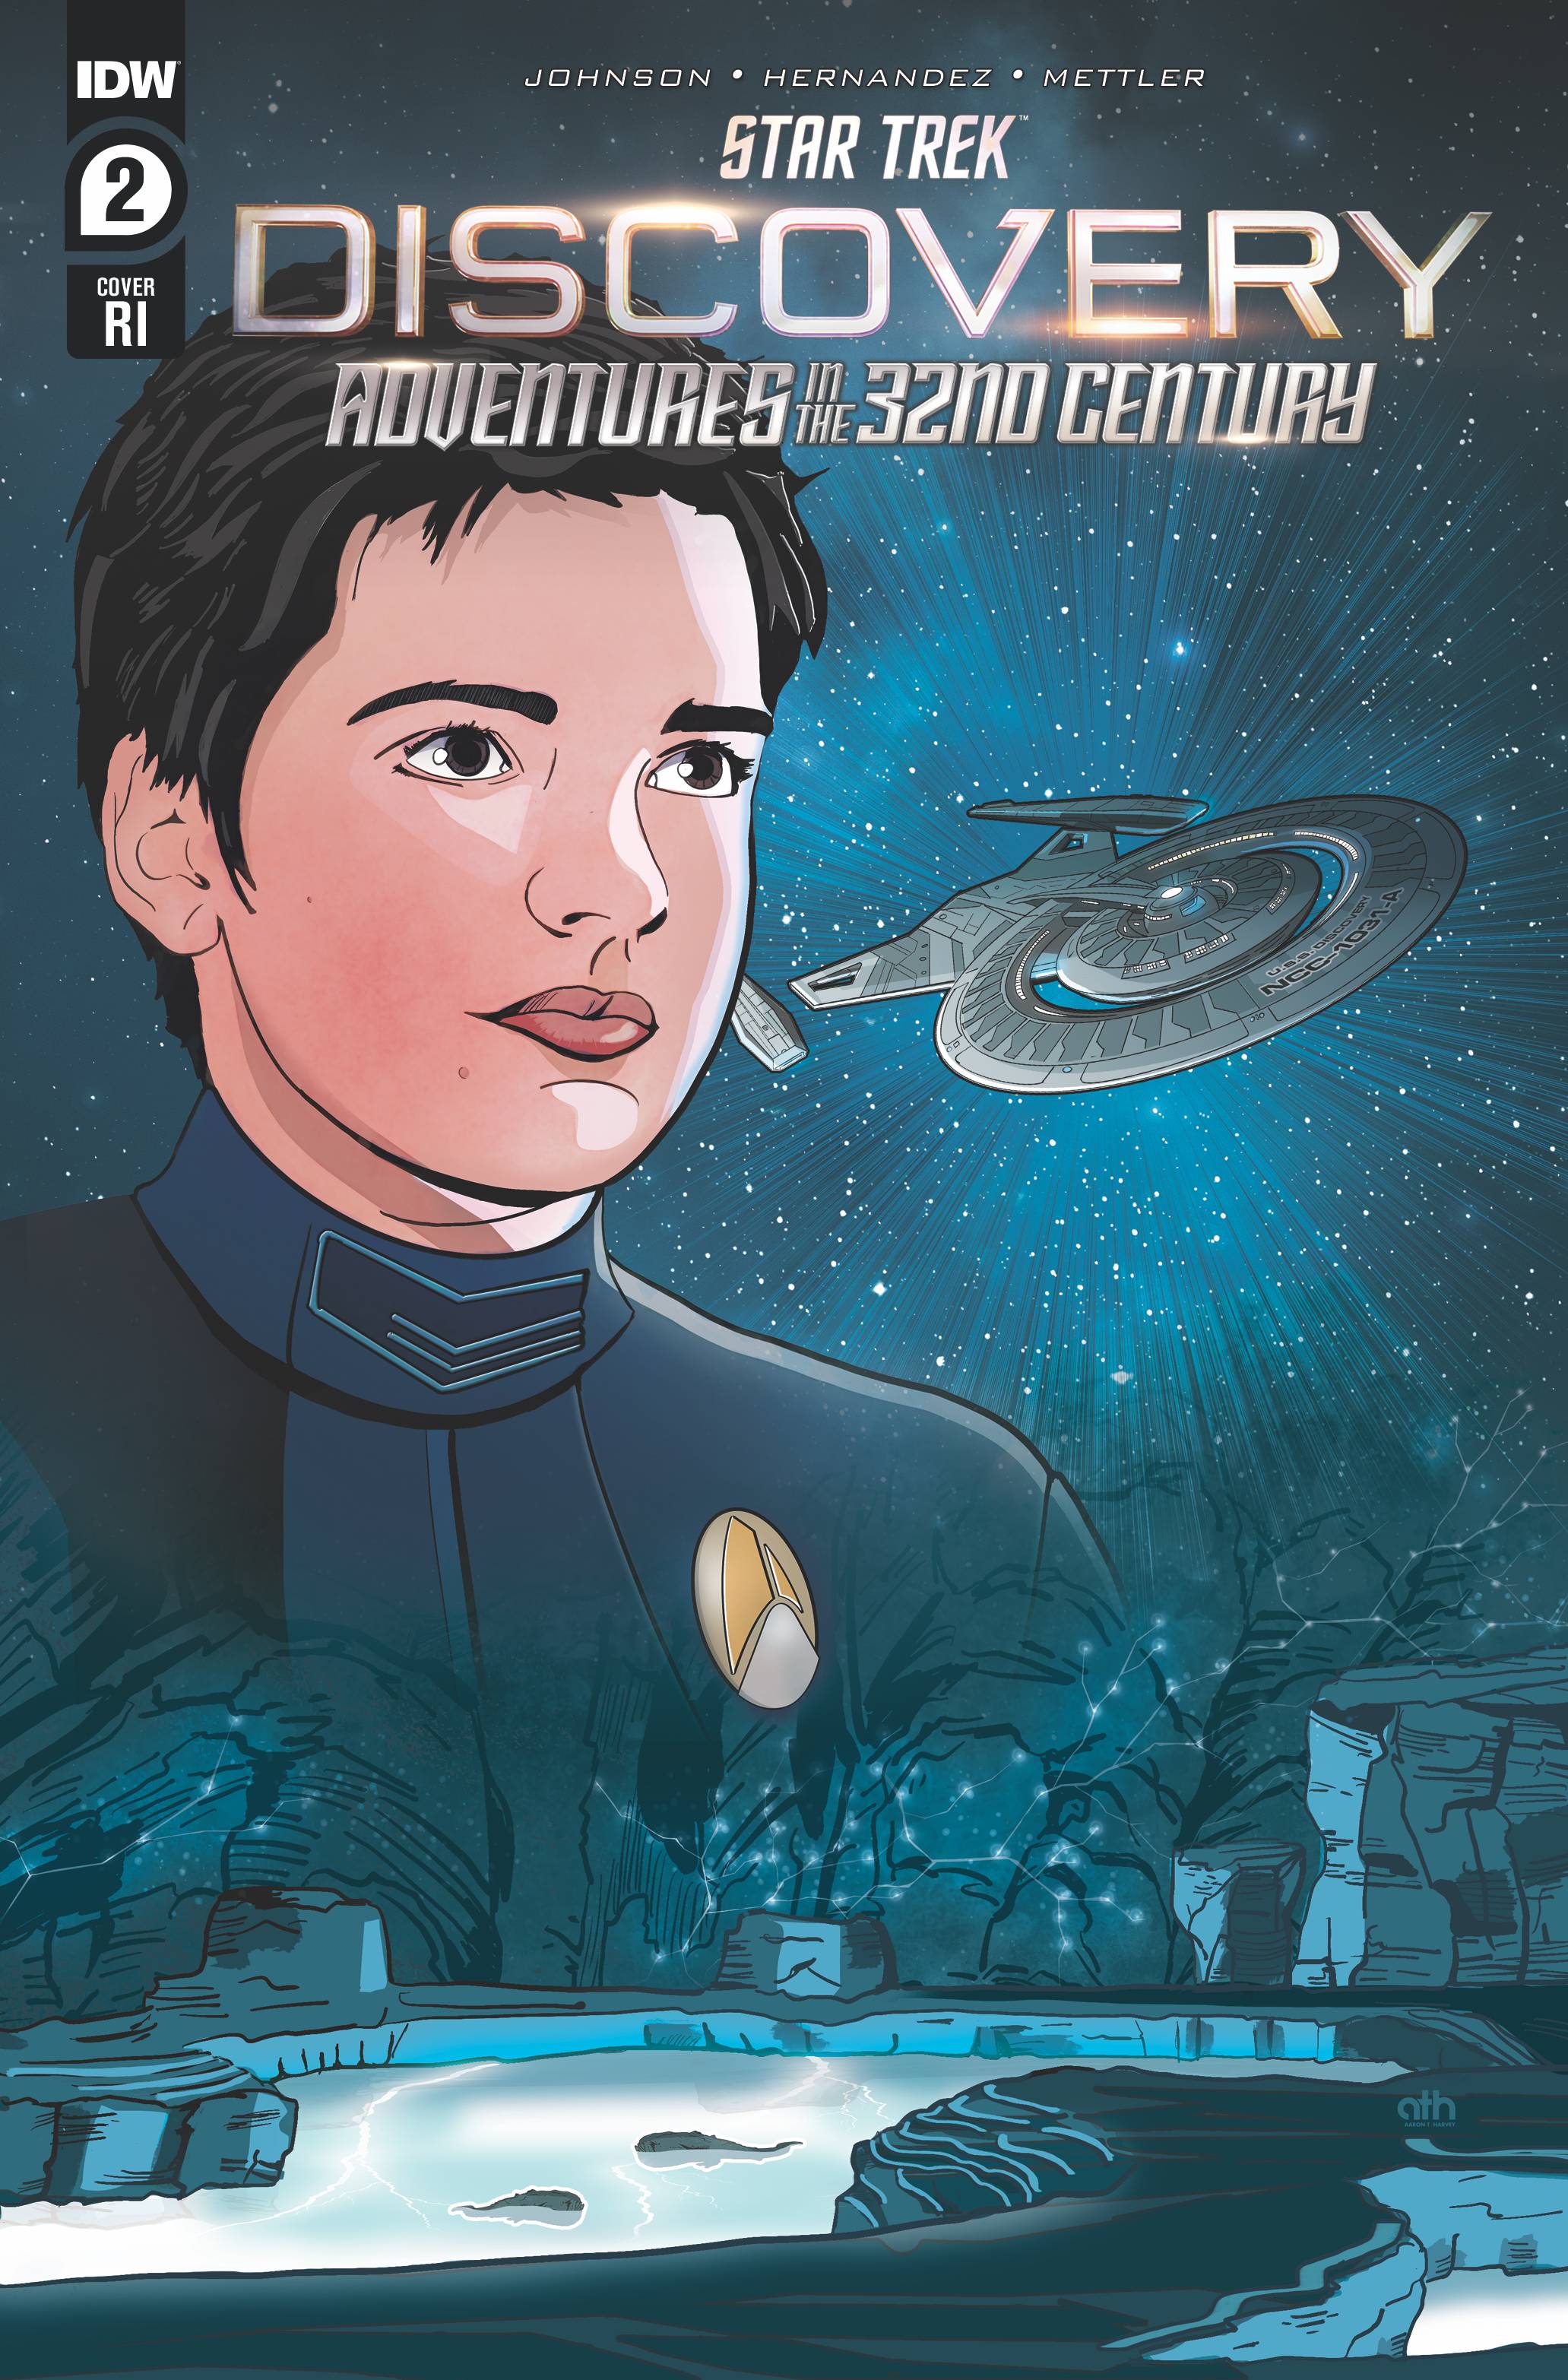 Star Trek Discovery Adventure In 32nd Century #2 Cover B 1 for 10 Incentive (Of 4)